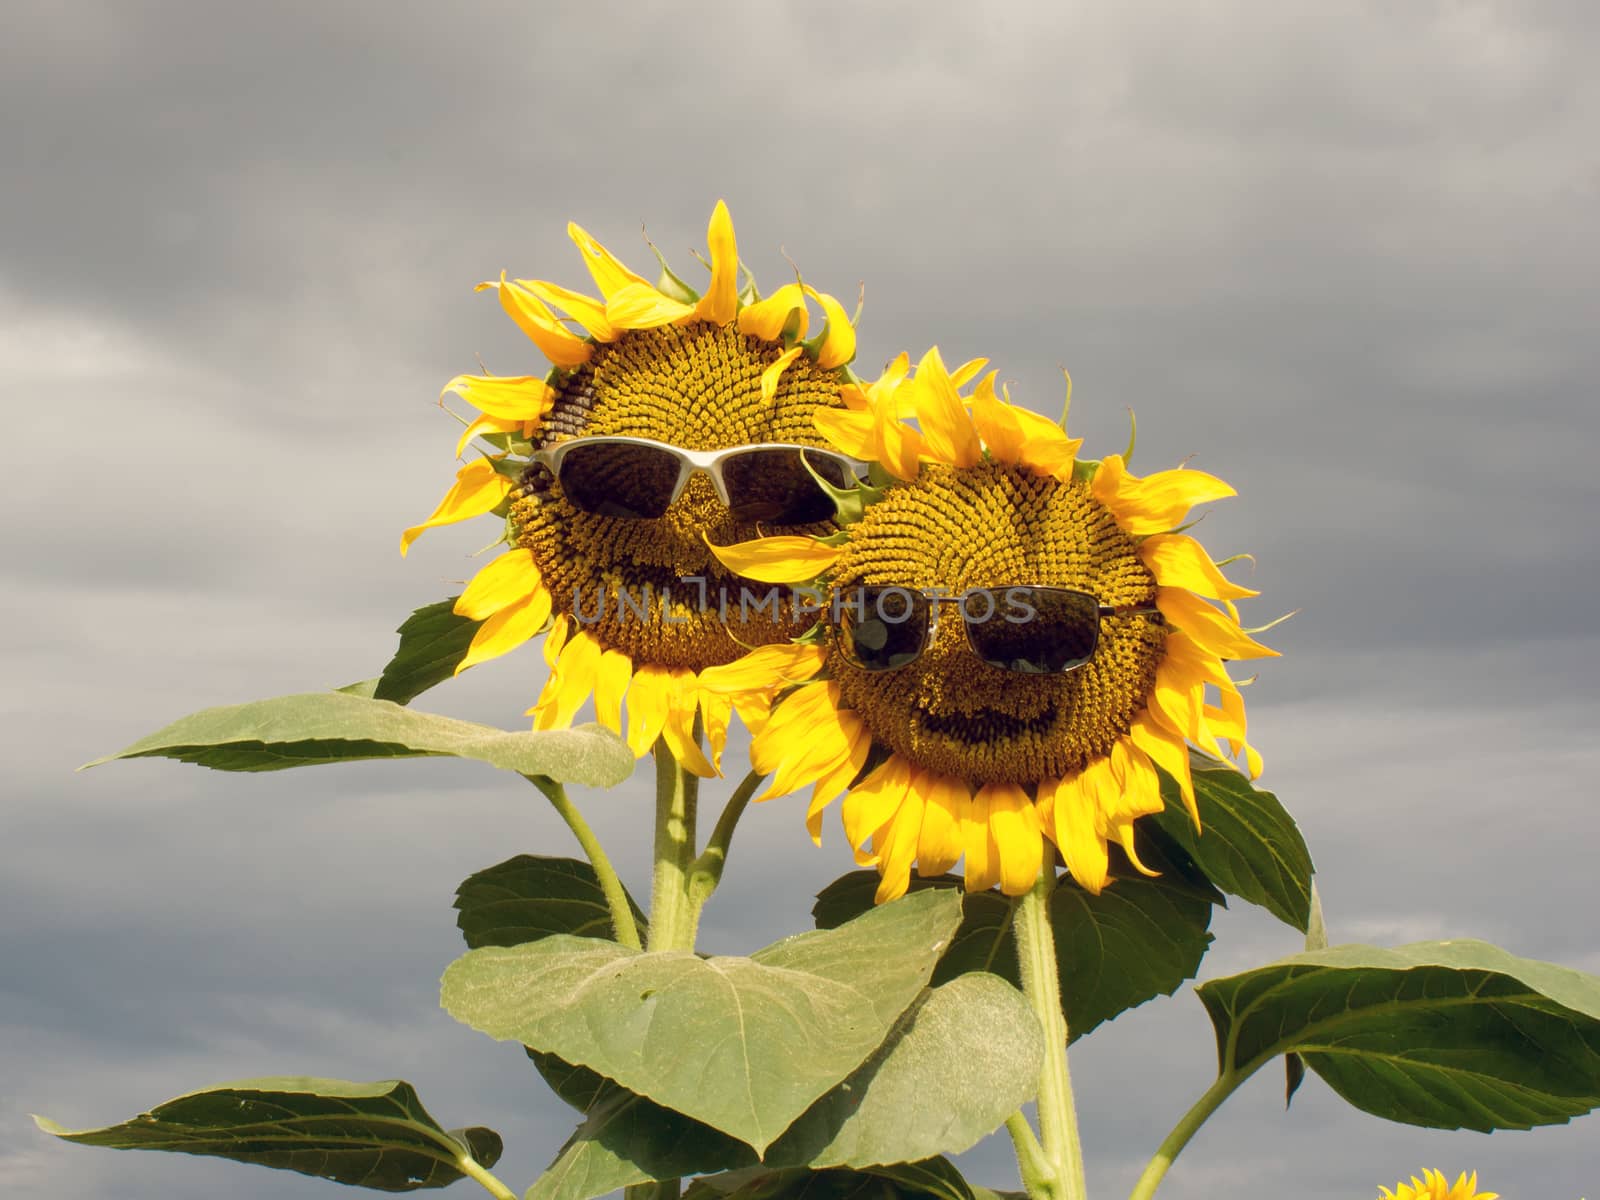 The sunflower family is the comic field.